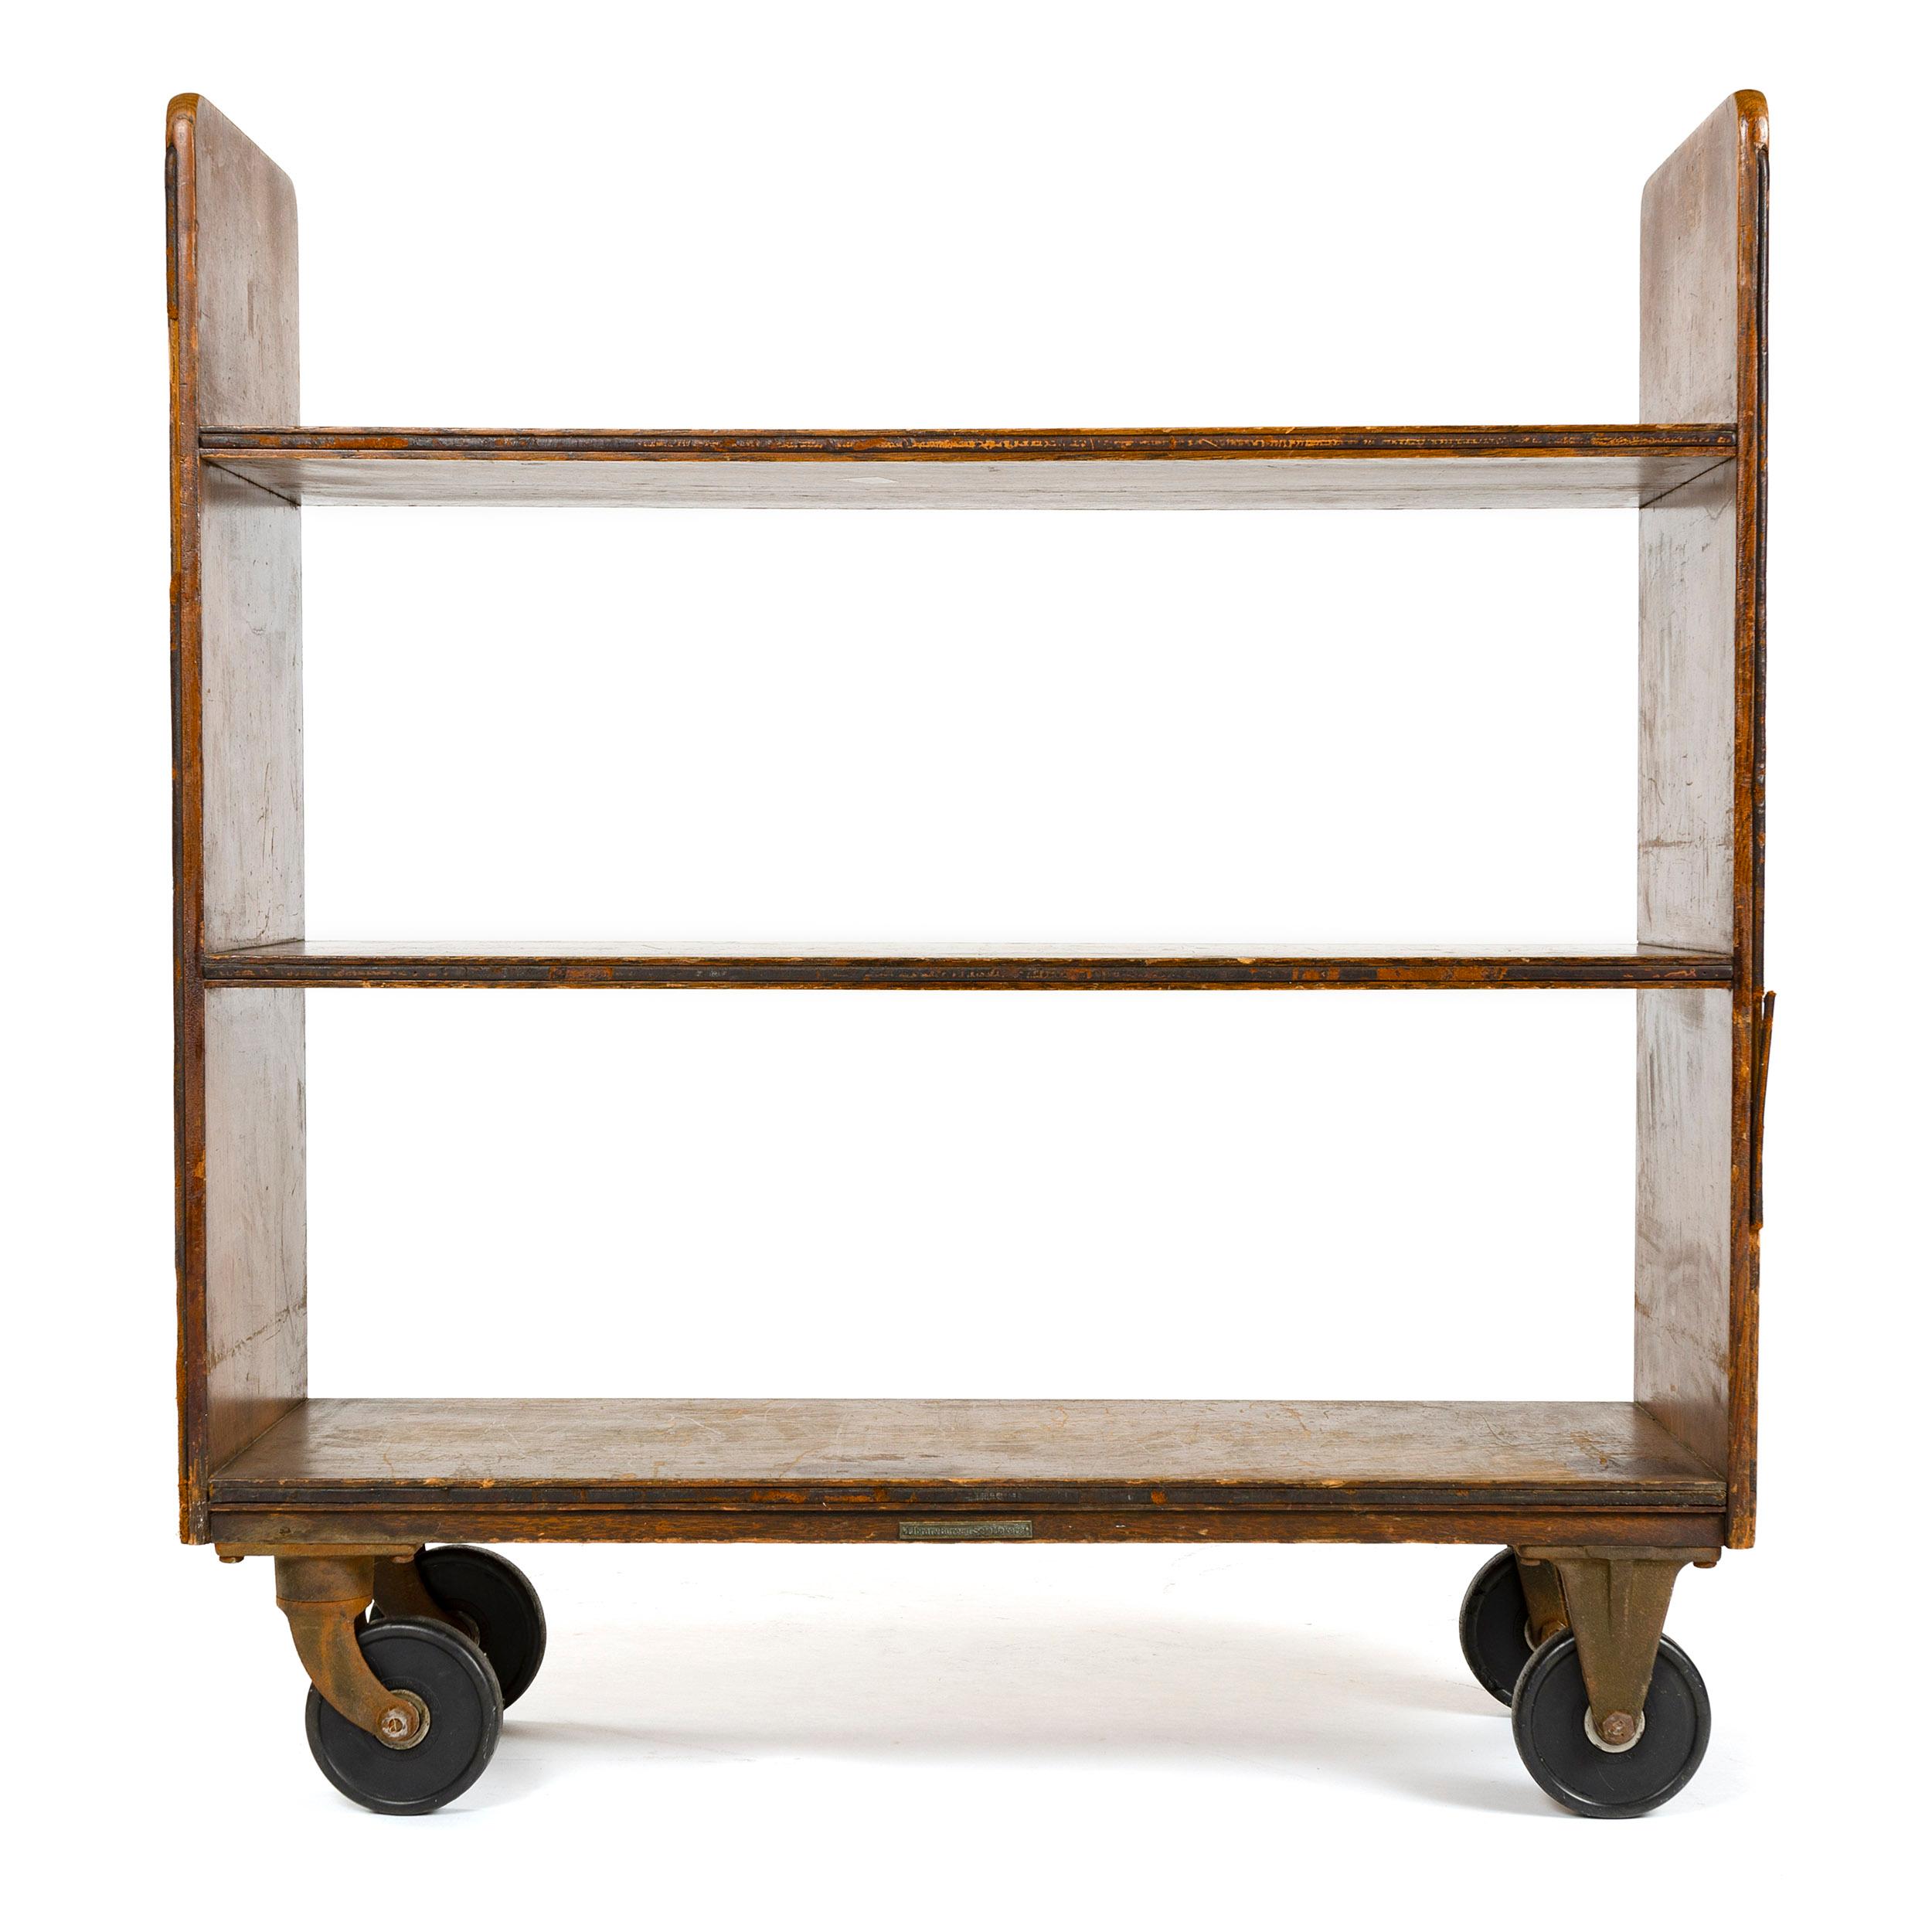 A mission, utilitarian style mobile shelving unit manufactured by the ‘Library Bureau SoleMakers’ company that pioneered and specialized in furnishings specifically designed for use in public and institutional libraries during the first three